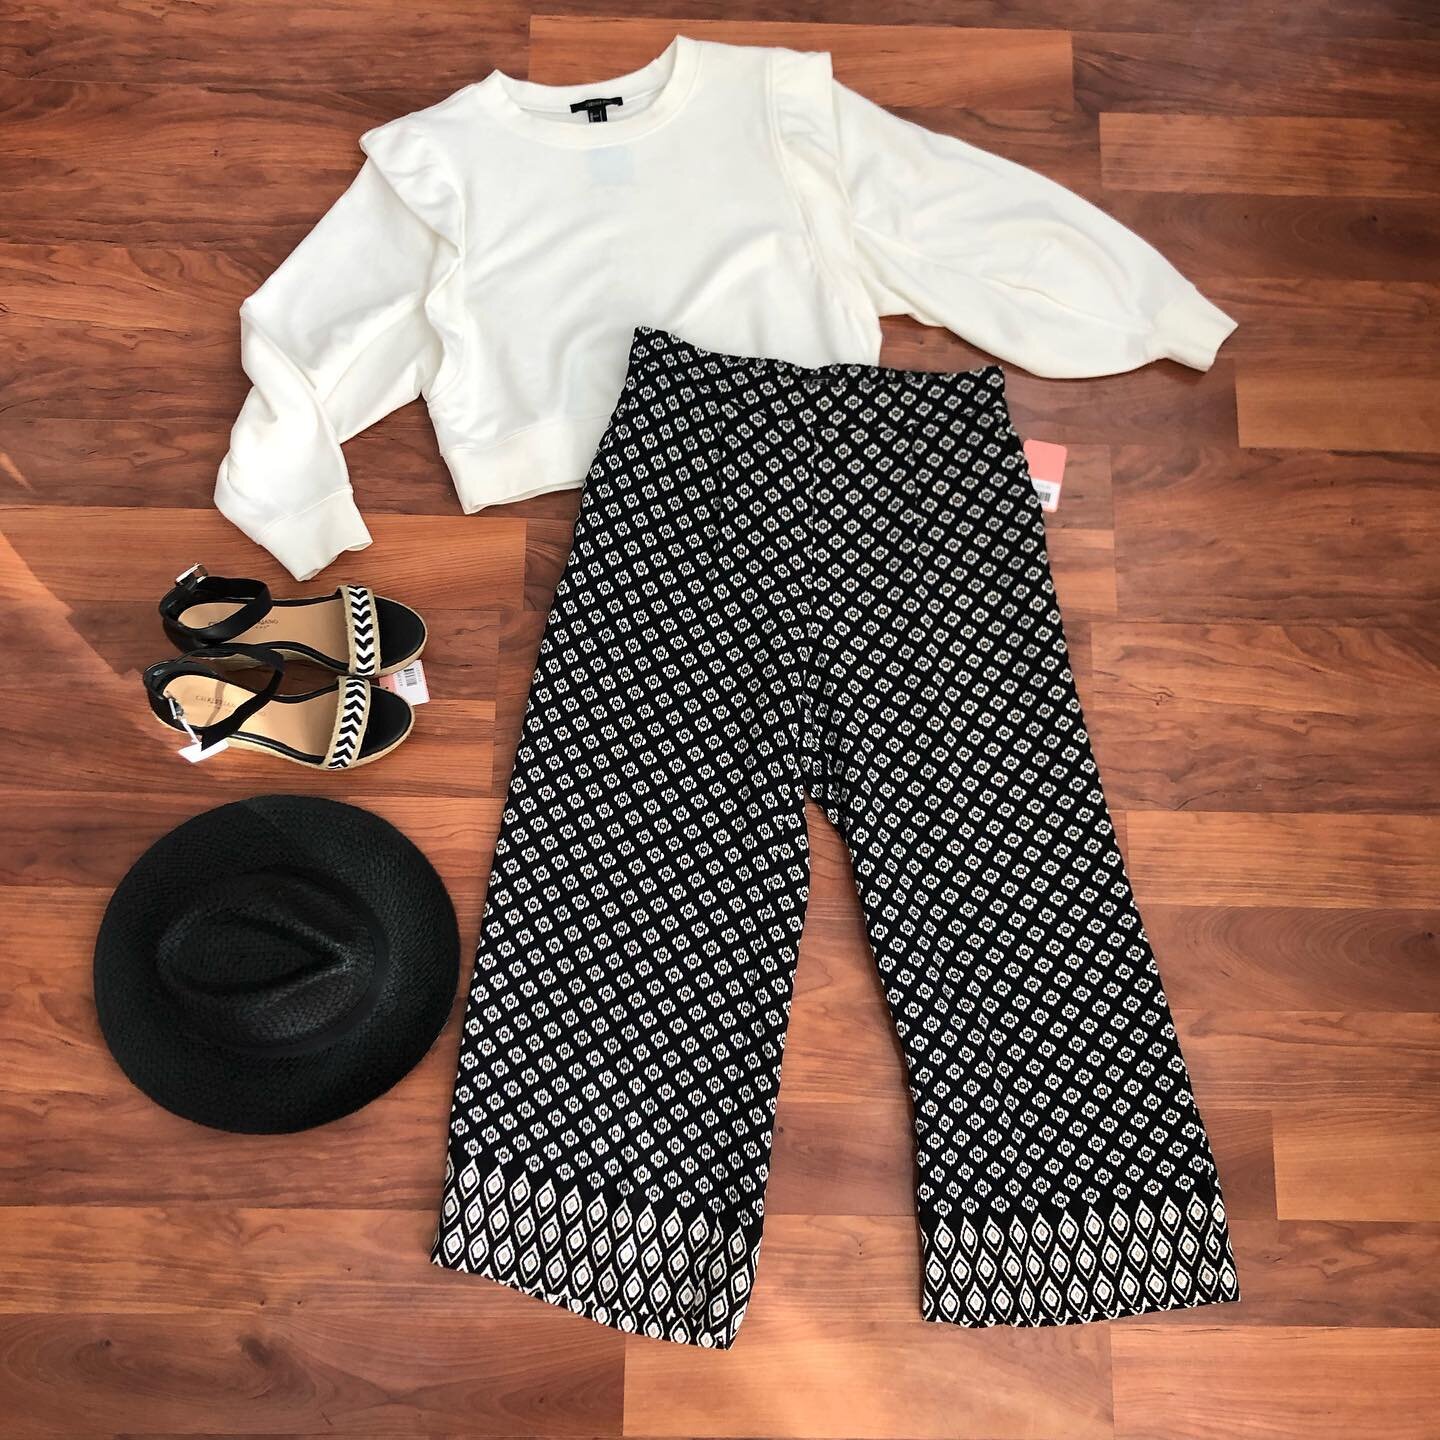 Which hat would YOU wear with this outfit ? 

🌸😍🤩 

Heels - 7.5 
Top - Small
Pants - Medium 

#mankato #shoplocal #smallbusiness #supportlocal #shopsmall #mn #msu #consignment